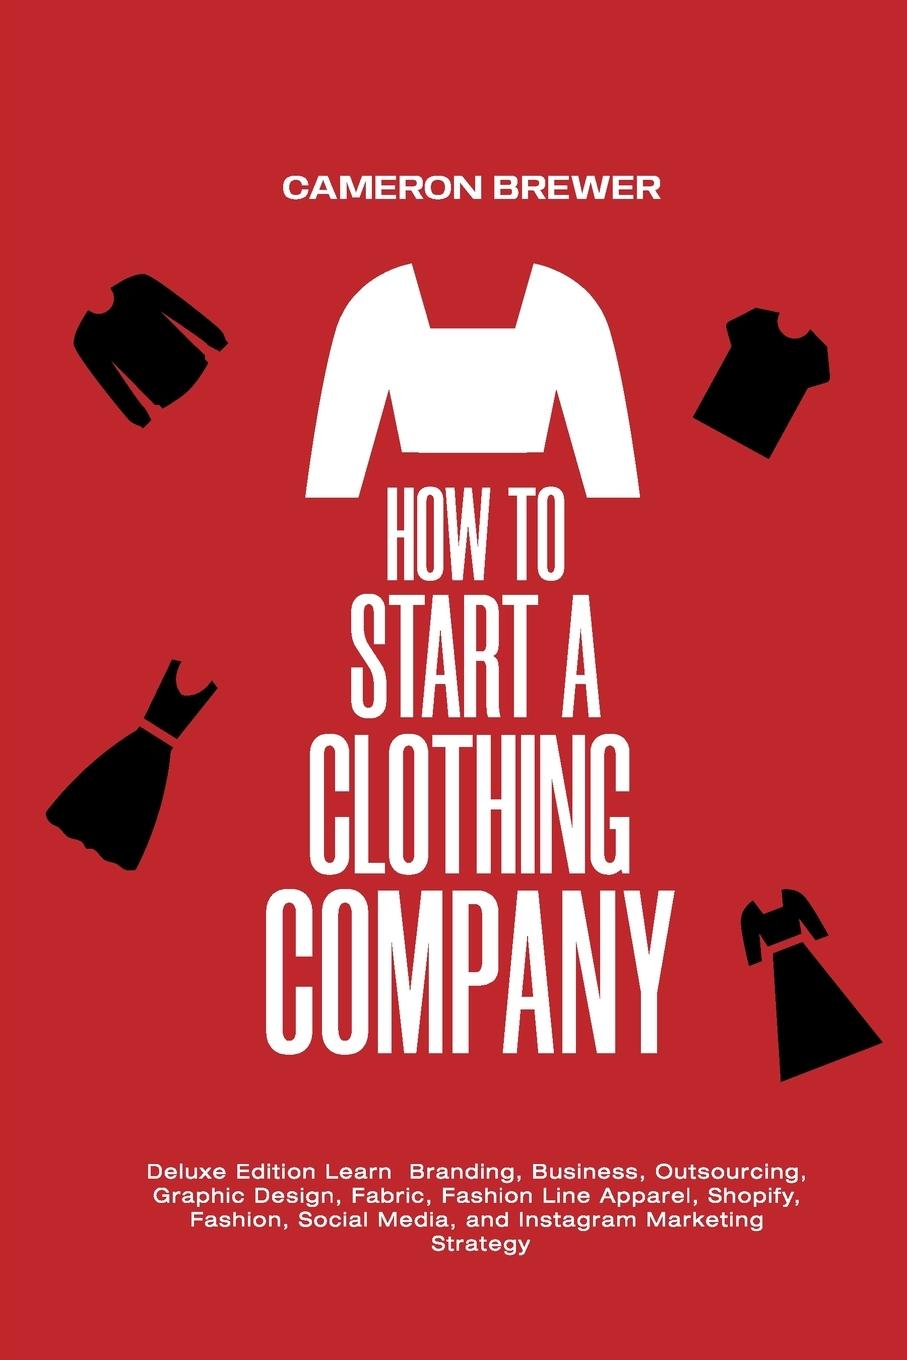 Kniha How to Start a Clothing Company - Deluxe Edition Learn Branding, Business, Outsourcing, Graphic Design, Fabric, Fashion Line Apparel, Shopify, Fashion CAMERON BREWER